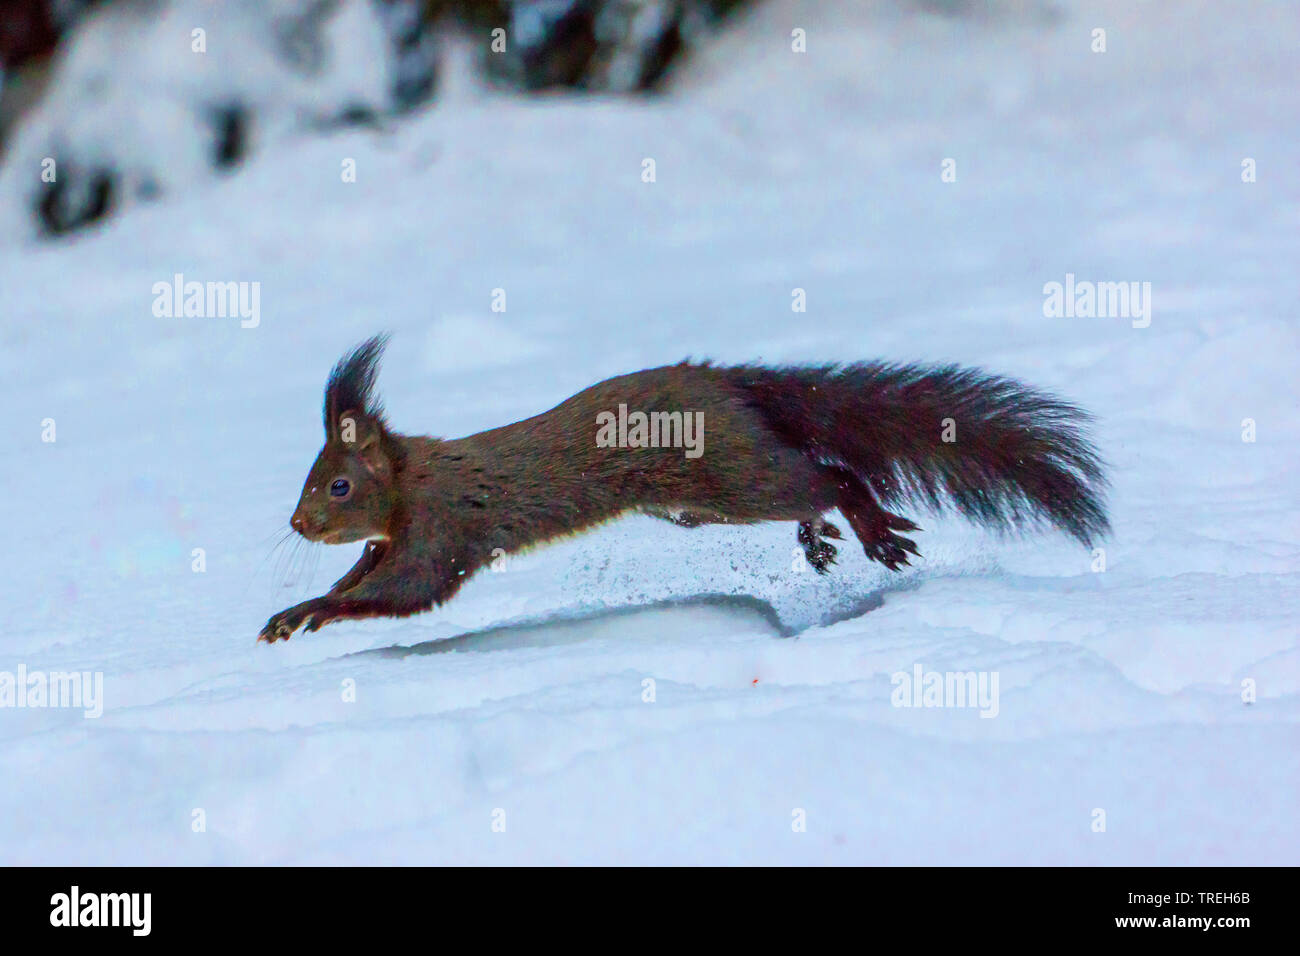 European red squirrel, Eurasian red squirrel (Sciurus vulgaris), jumping through the snow and searching for food, Switzerland, Grisons Stock Photo